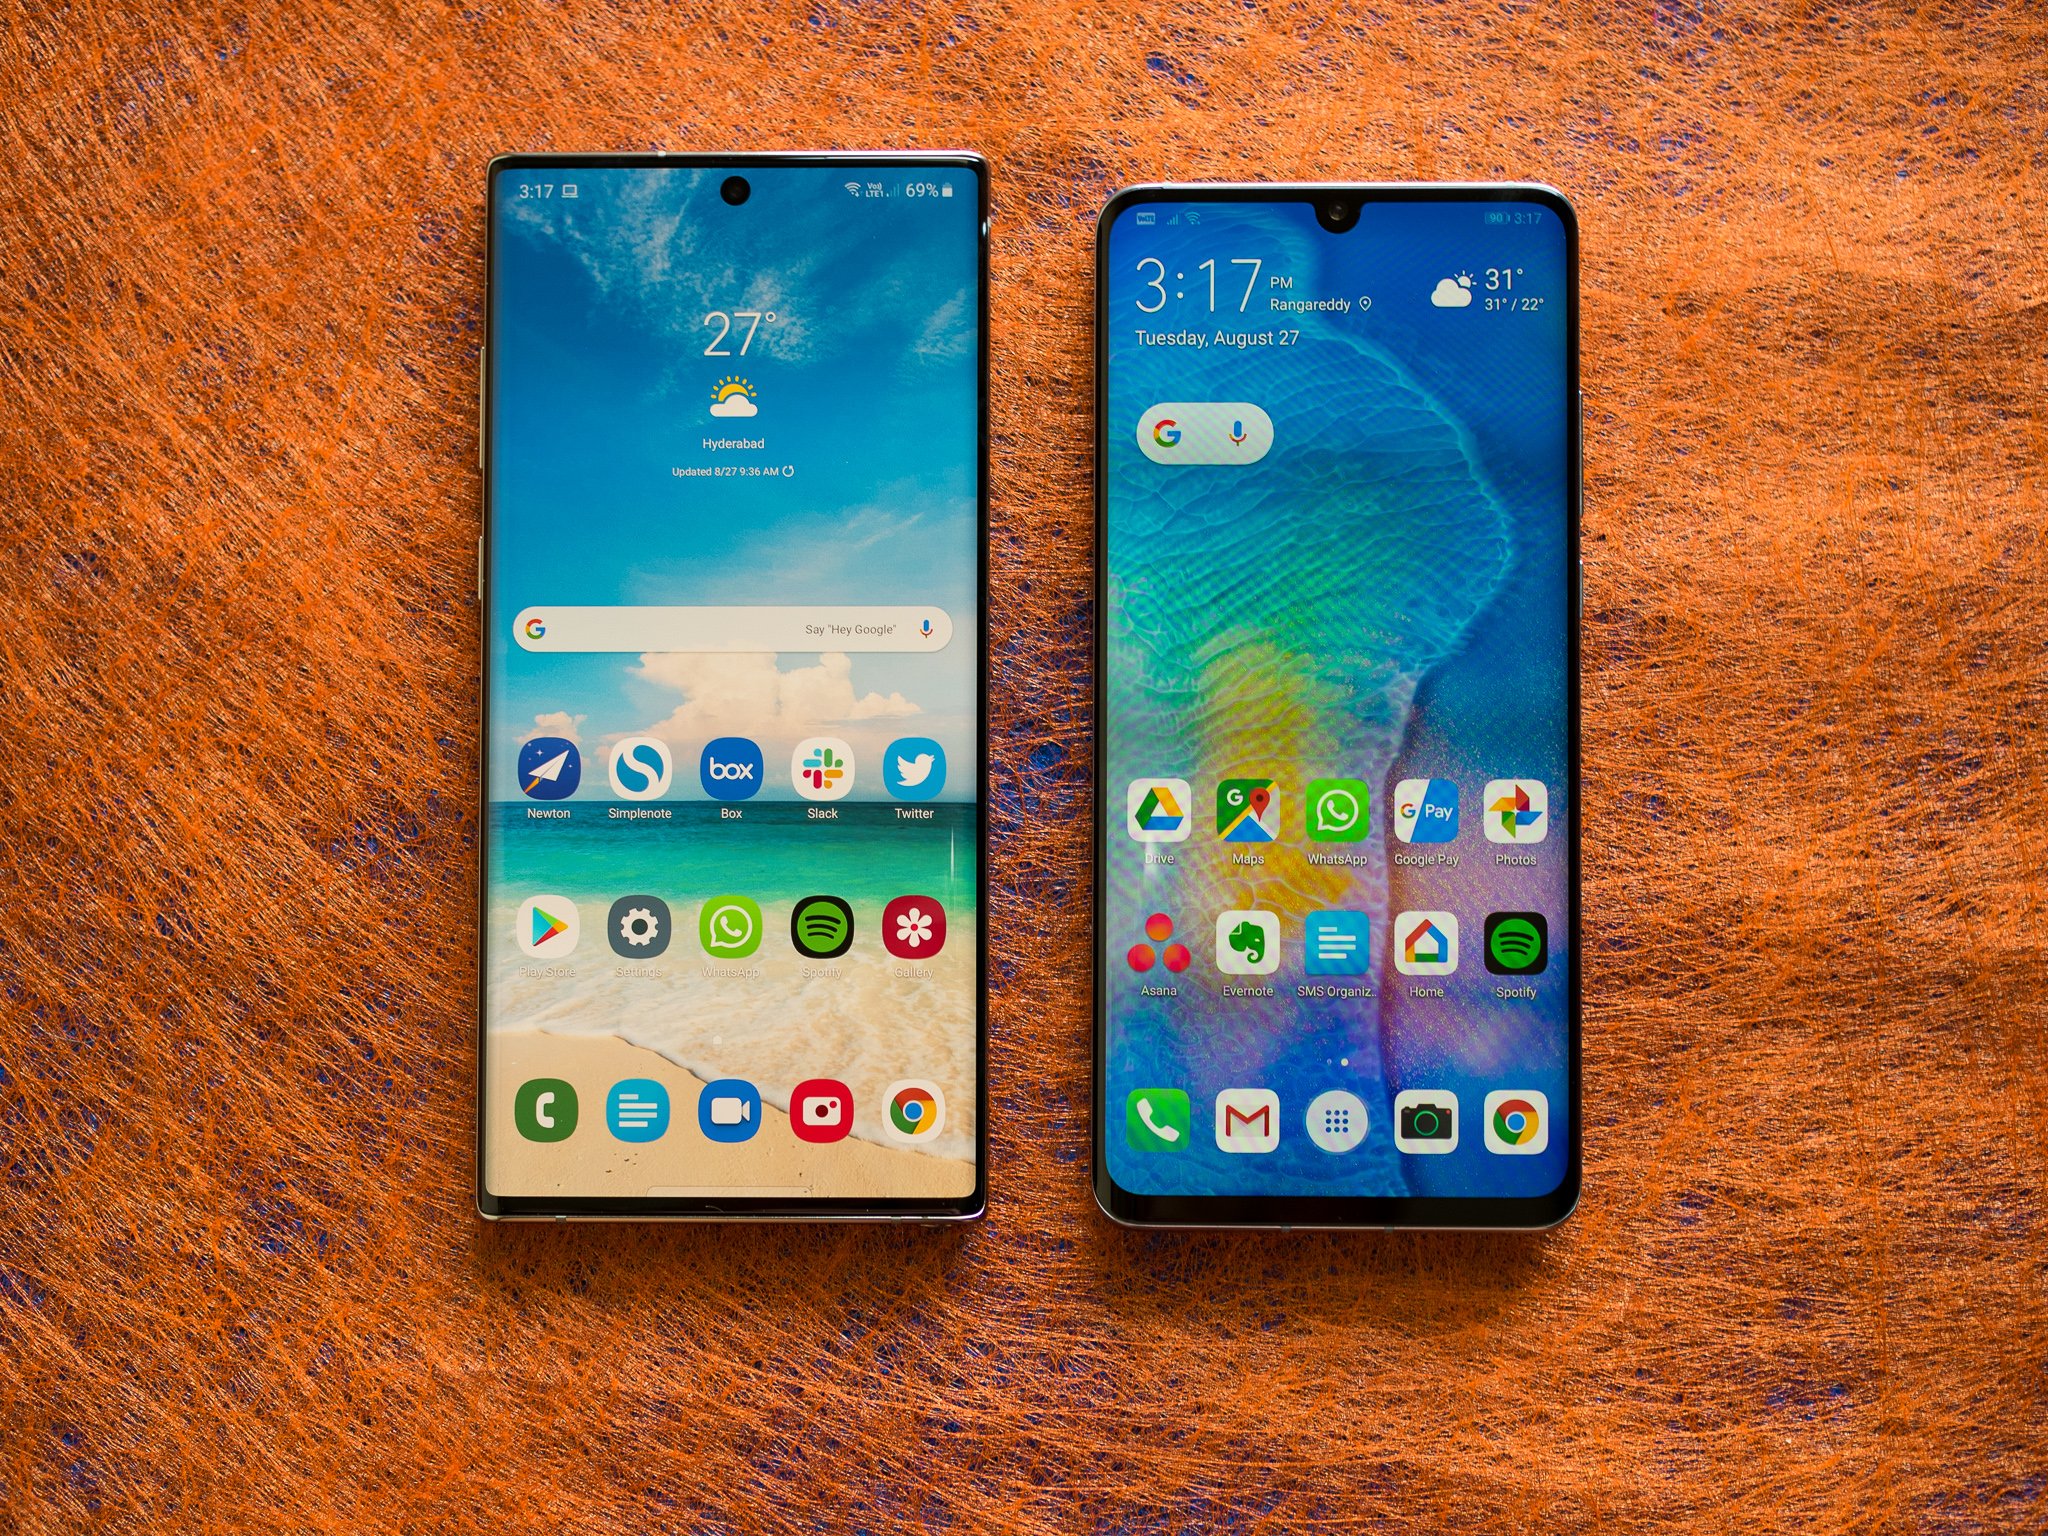 Huawei Note 10. Note 10 Plus vs Note 20. LG Wing vs Galaxy Note 10 Plus.